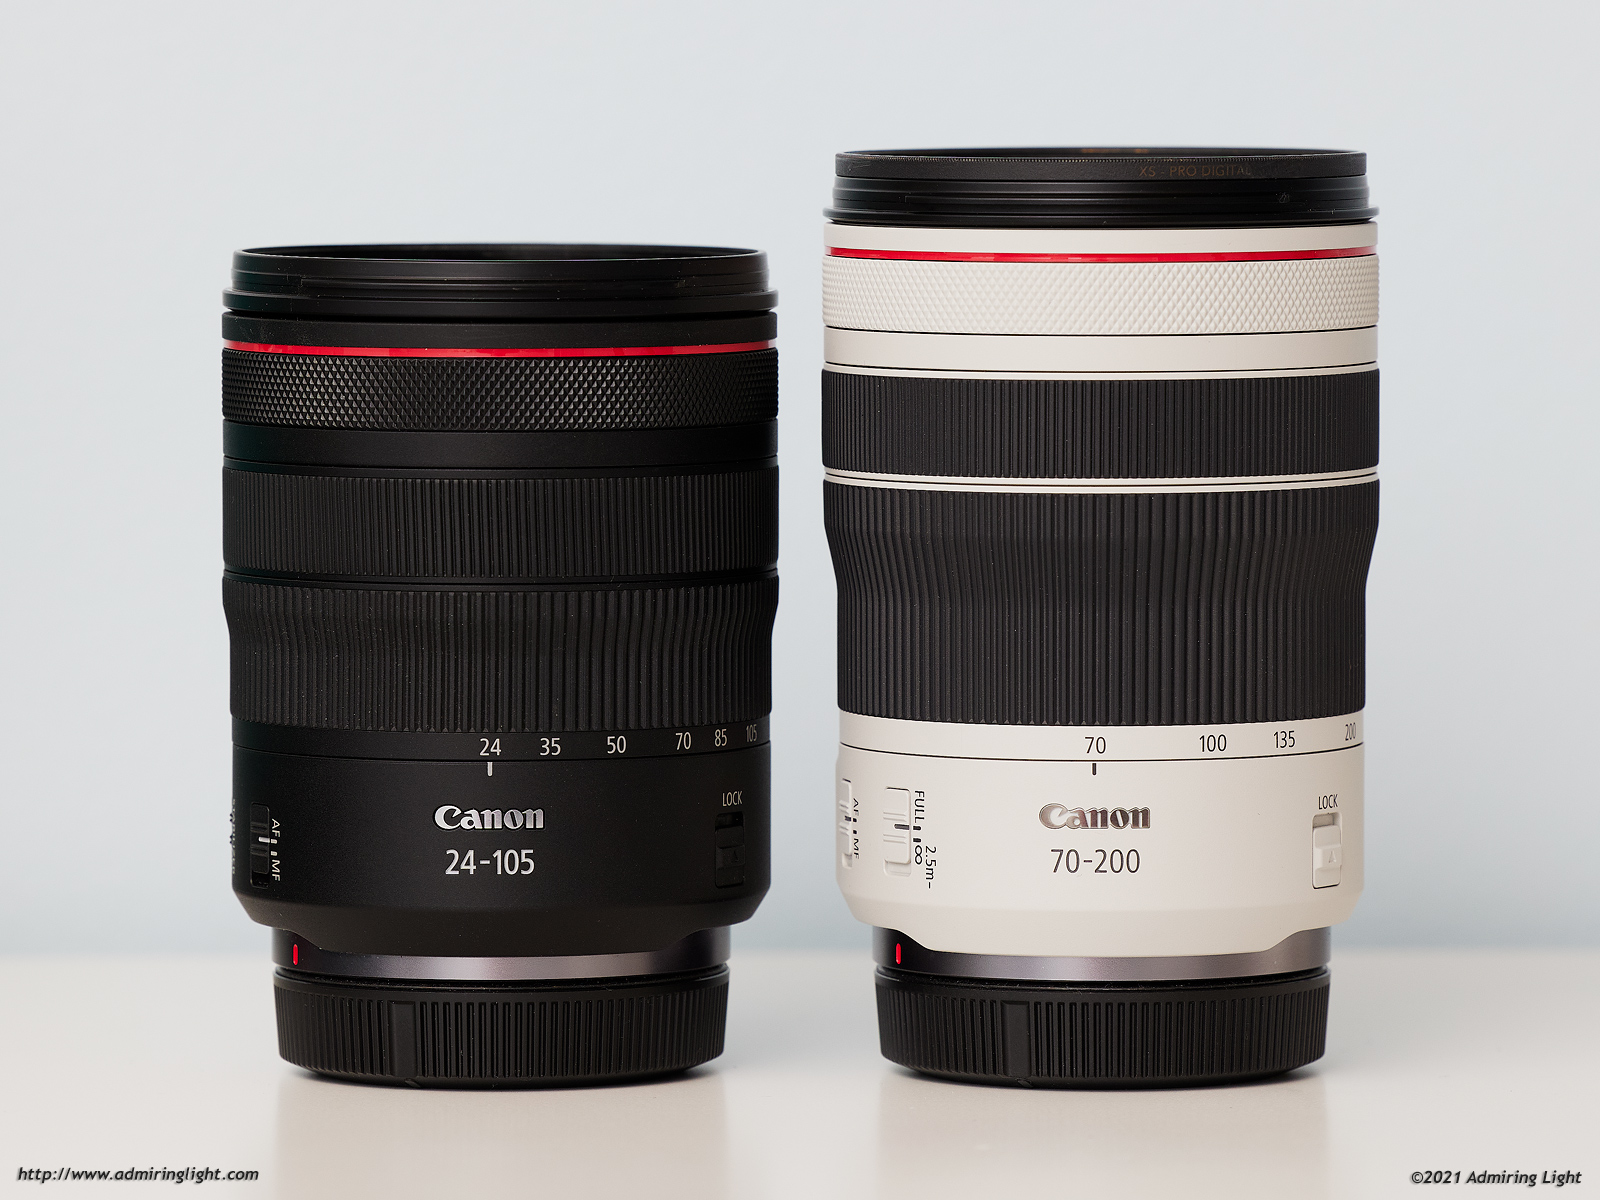 Review: Canon RF 70-200mm f/4L IS USM - Admiring Light